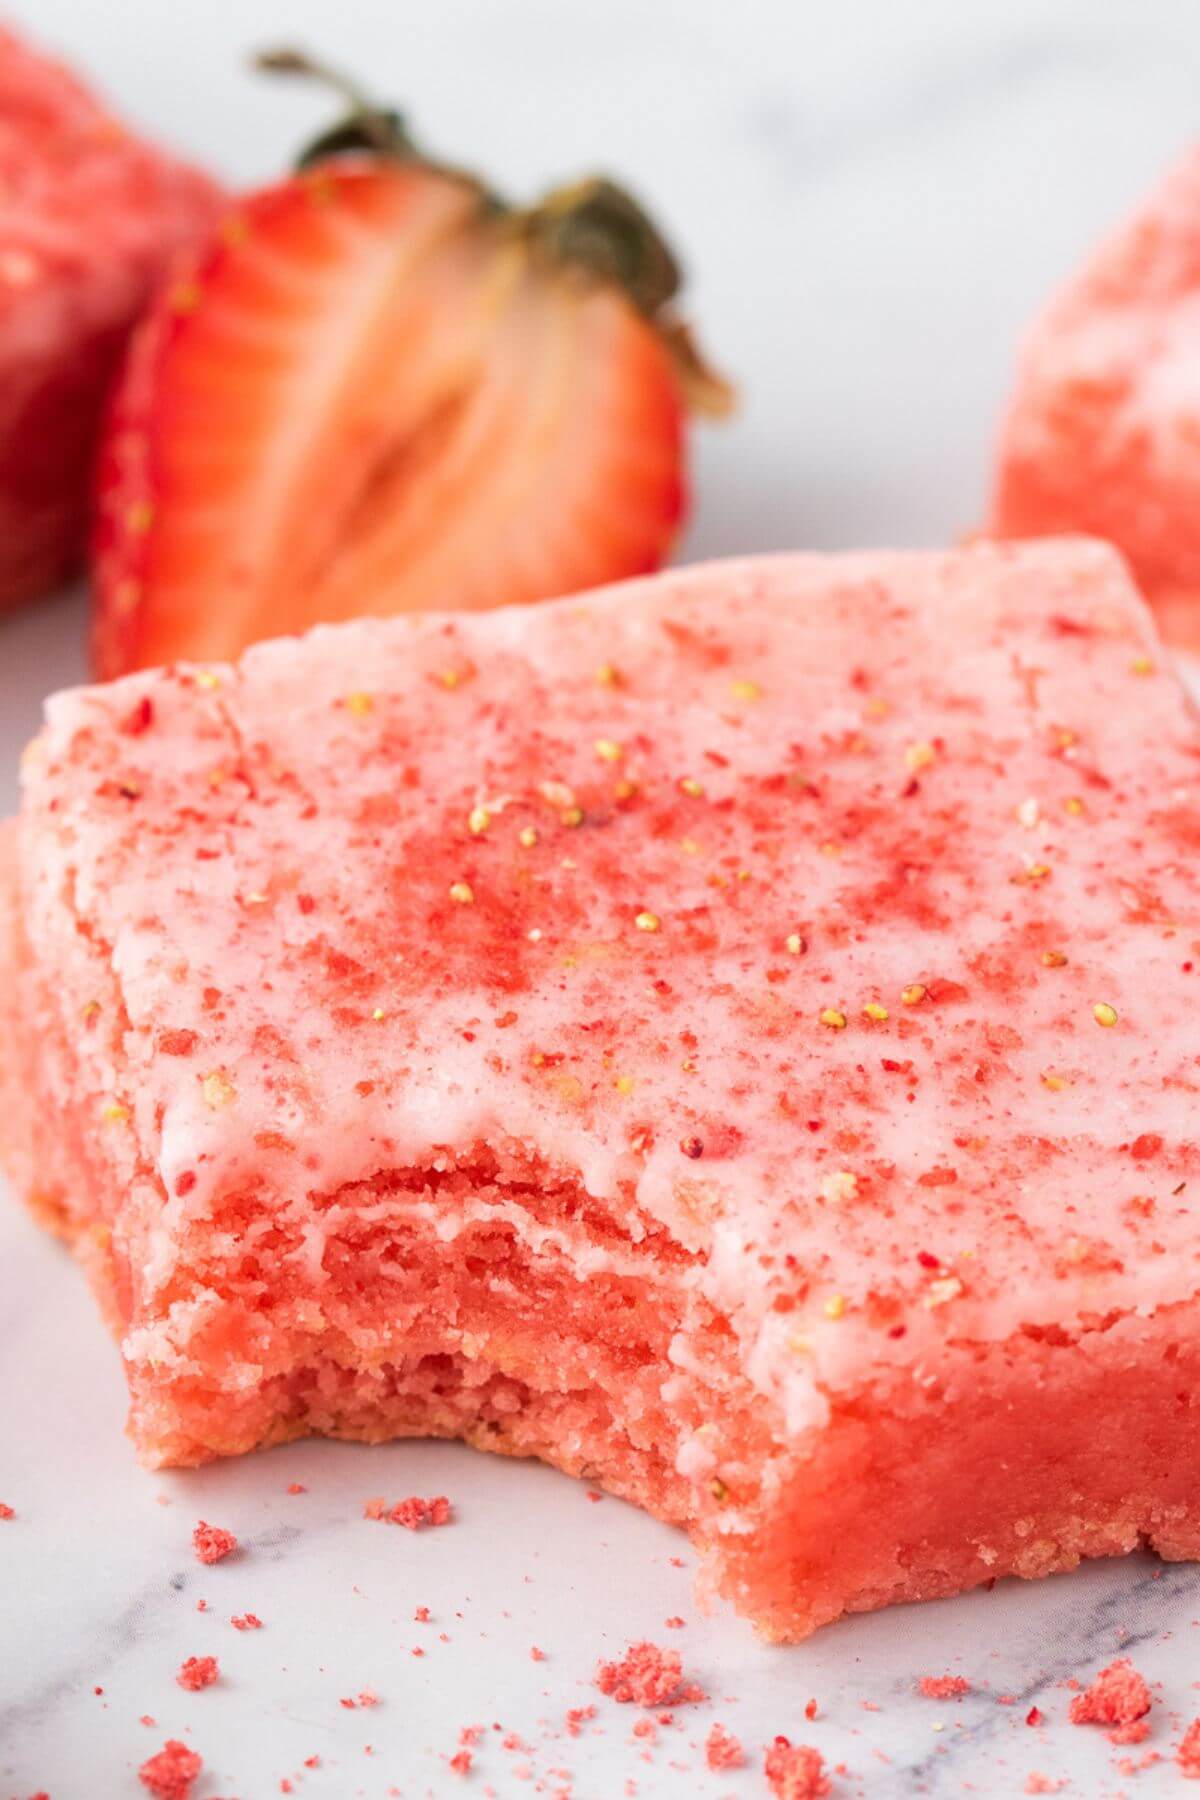 Strawberries lay behind a pink baked square with a bite taken from it.